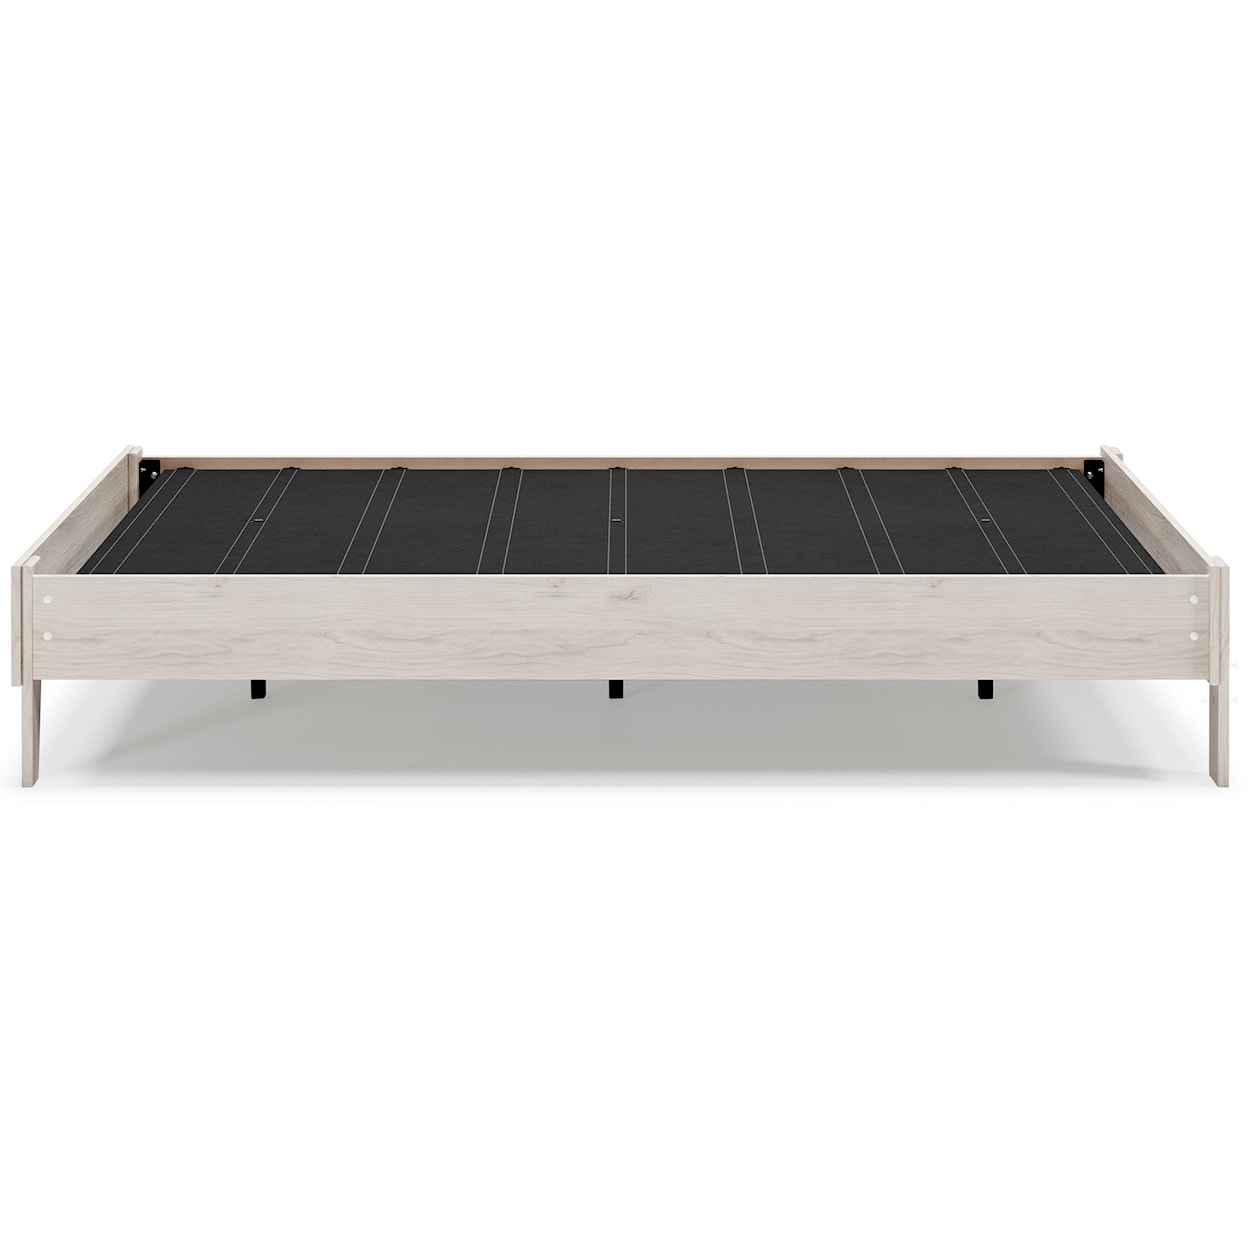 Signature Design by Ashley Socalle Queen Platform Bed